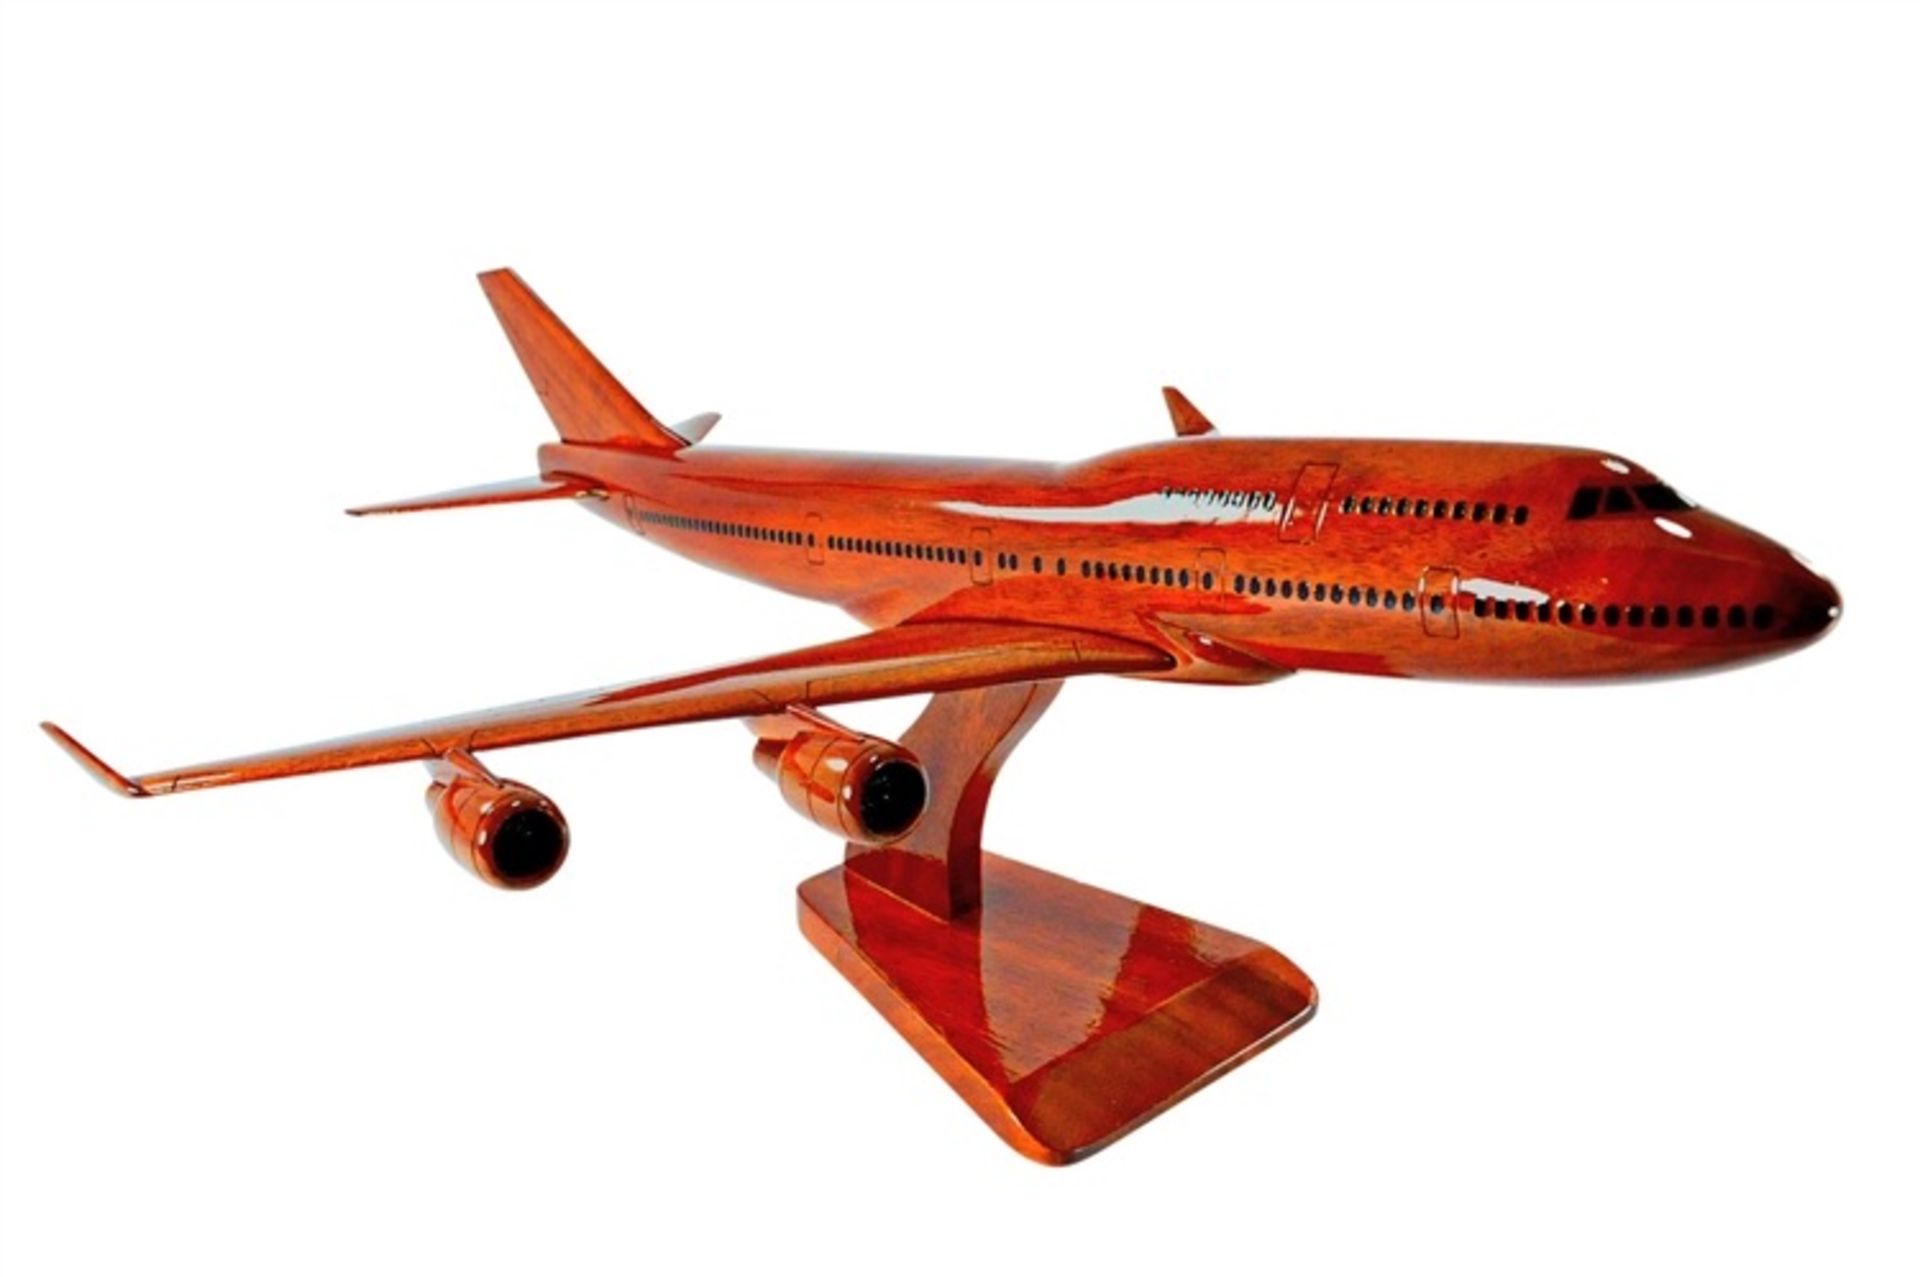 Boeing 747 Wooden Scale Desk Display - Image 2 of 4